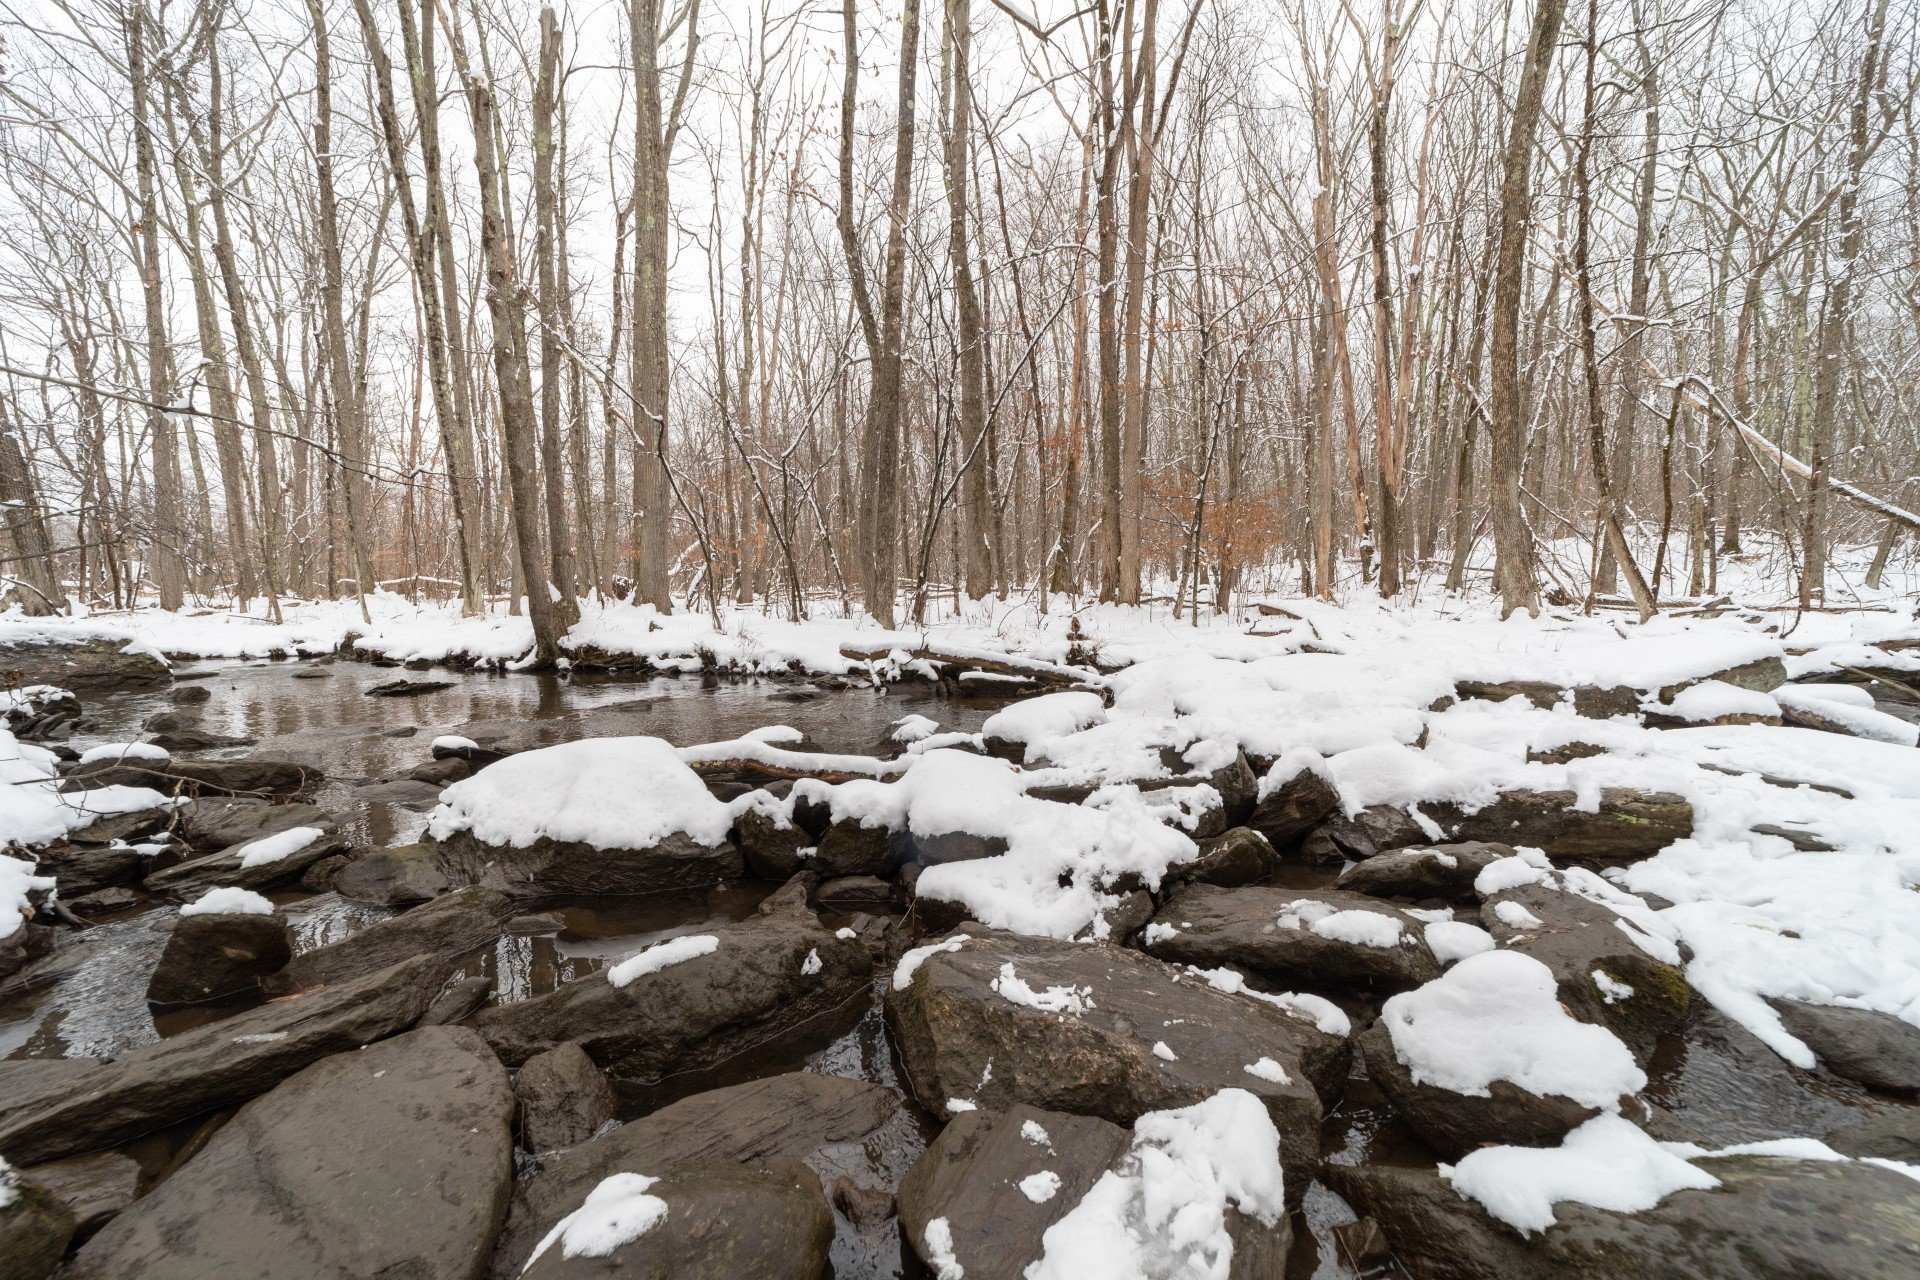 snow covered rocks by a winter river